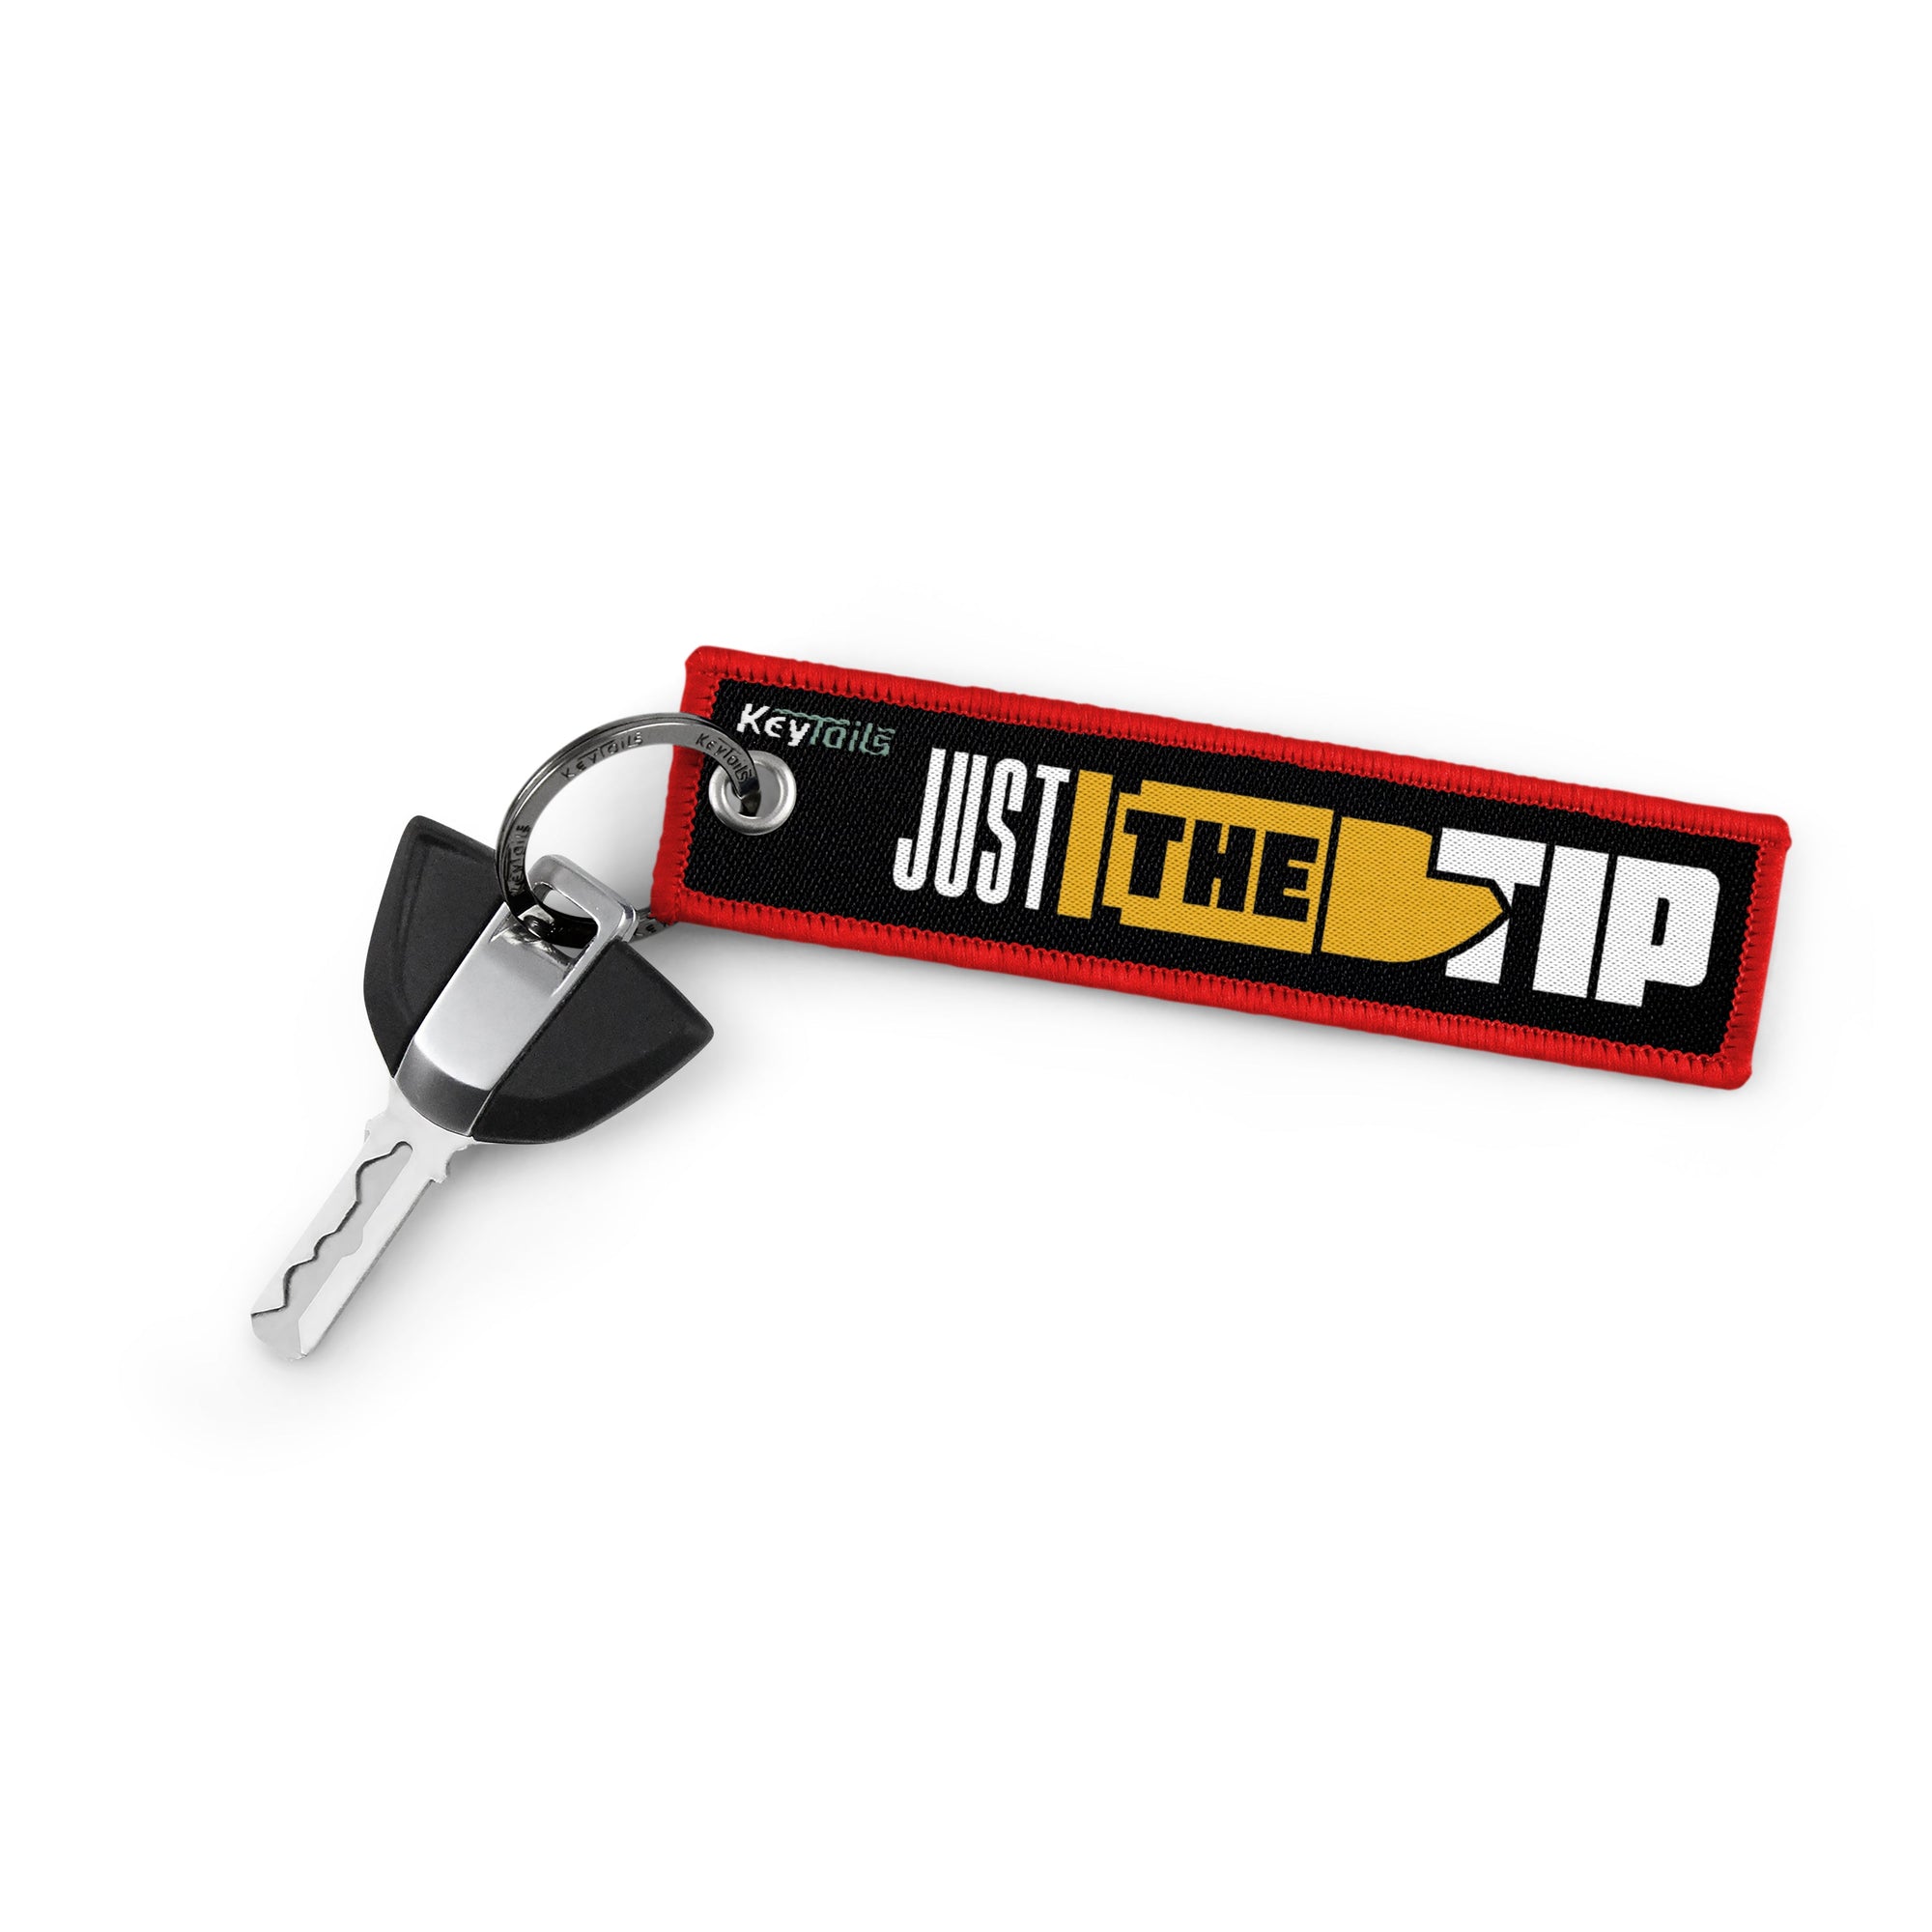 Just The Tip Keychain, Key Tag - Red